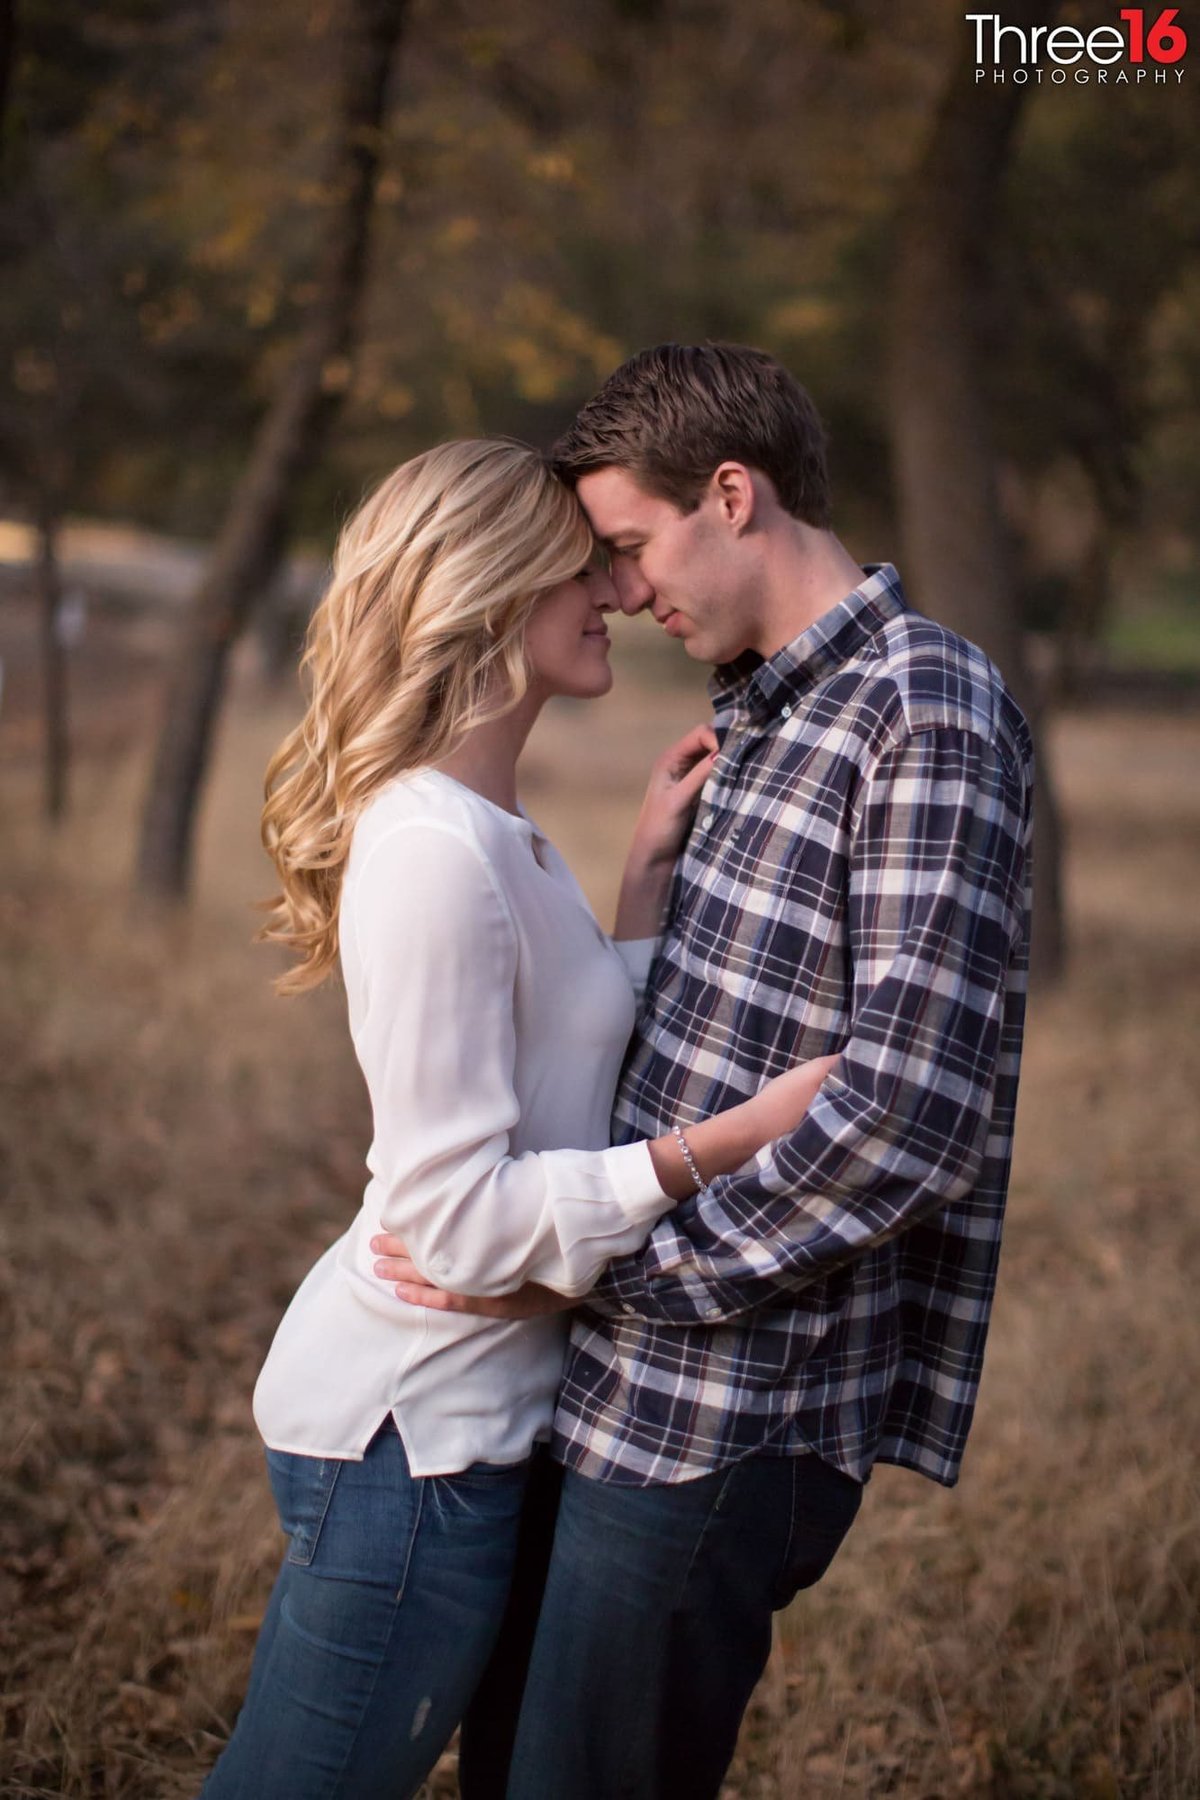 Tender moment between engaged couple during their Riley's Farm photo shoot